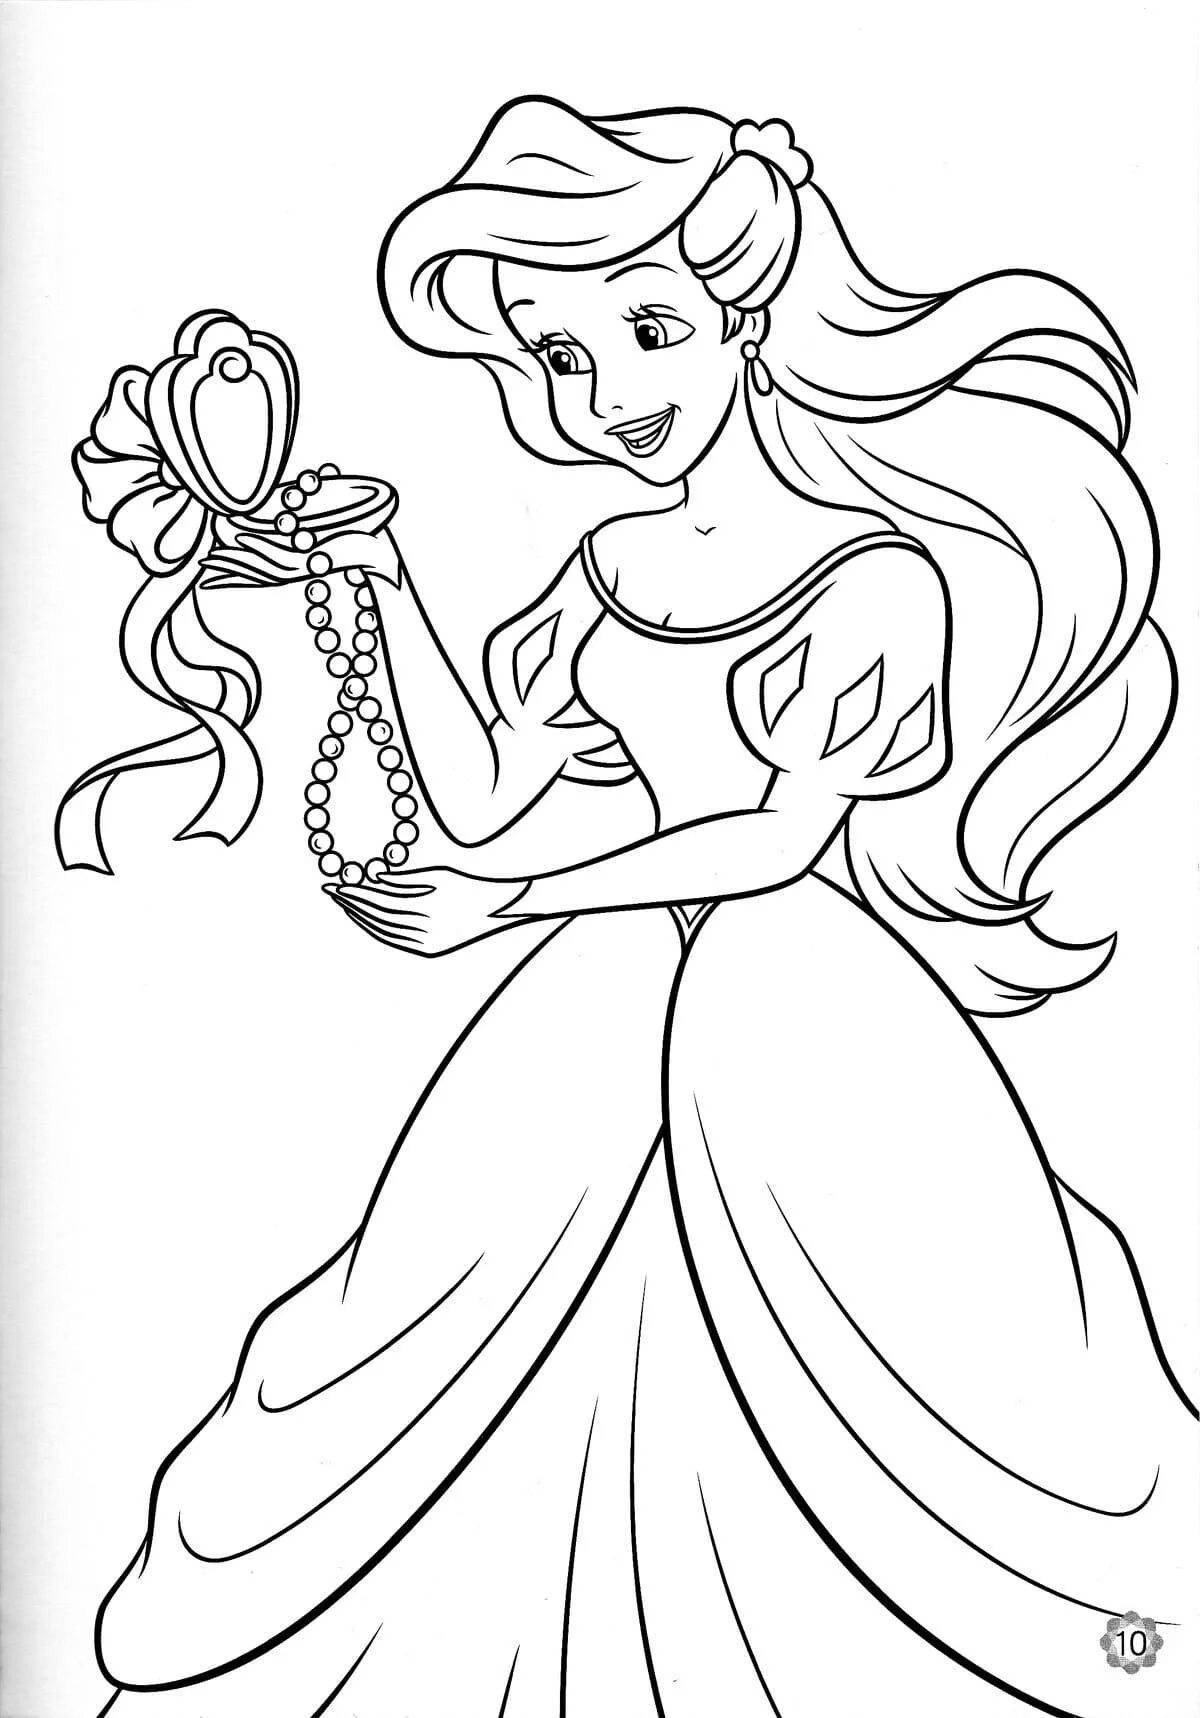 Awesome princess coloring pages